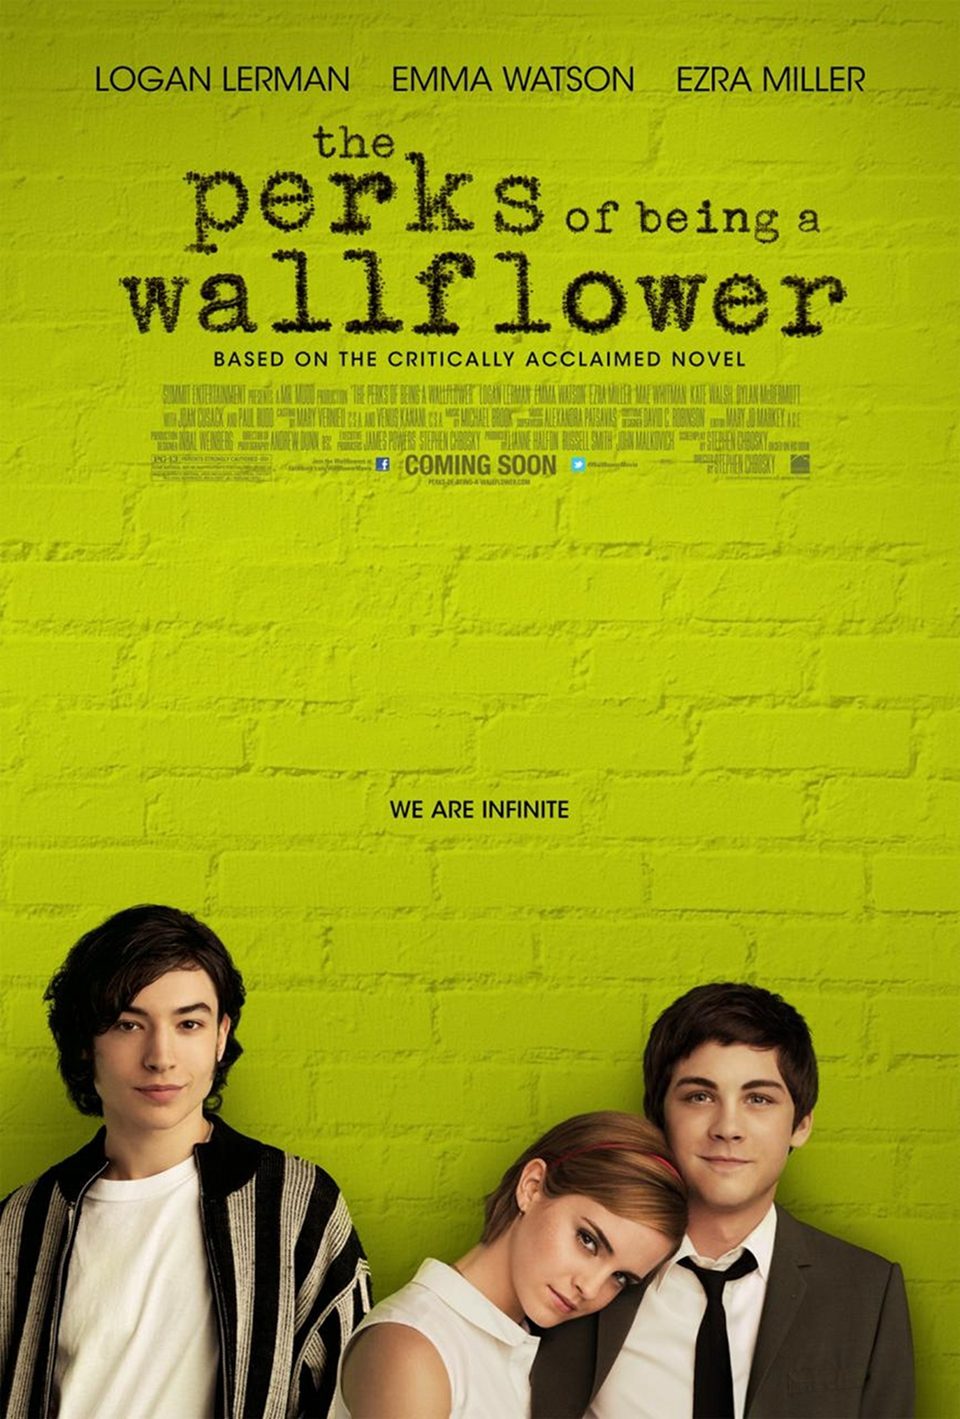 Estados Unidos poster for The Perks of Being a Wallflower